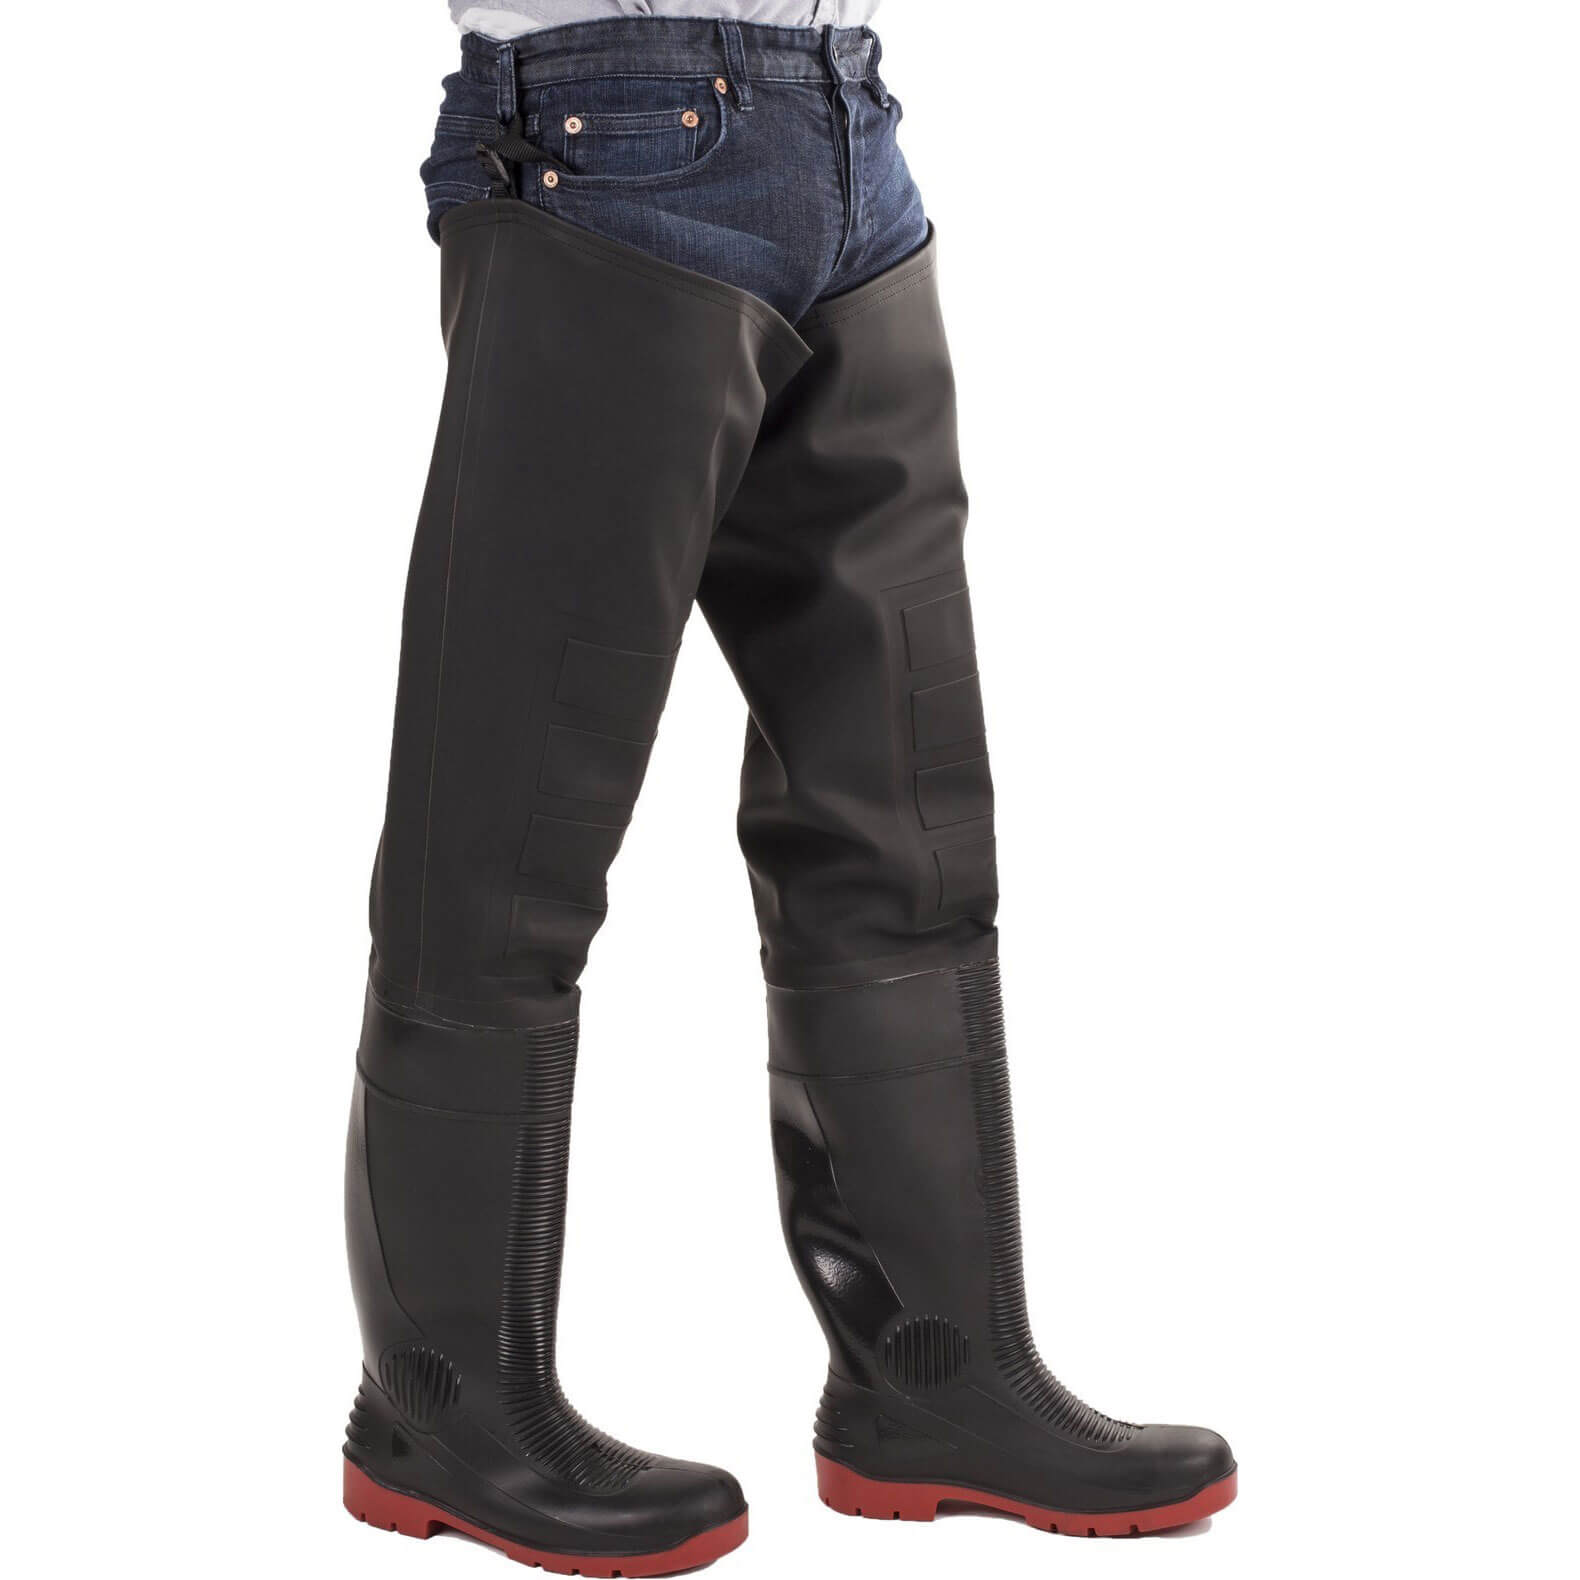 Image of Amblers Safety Rhone Thigh Safety Wader Black / Red Size 6.5